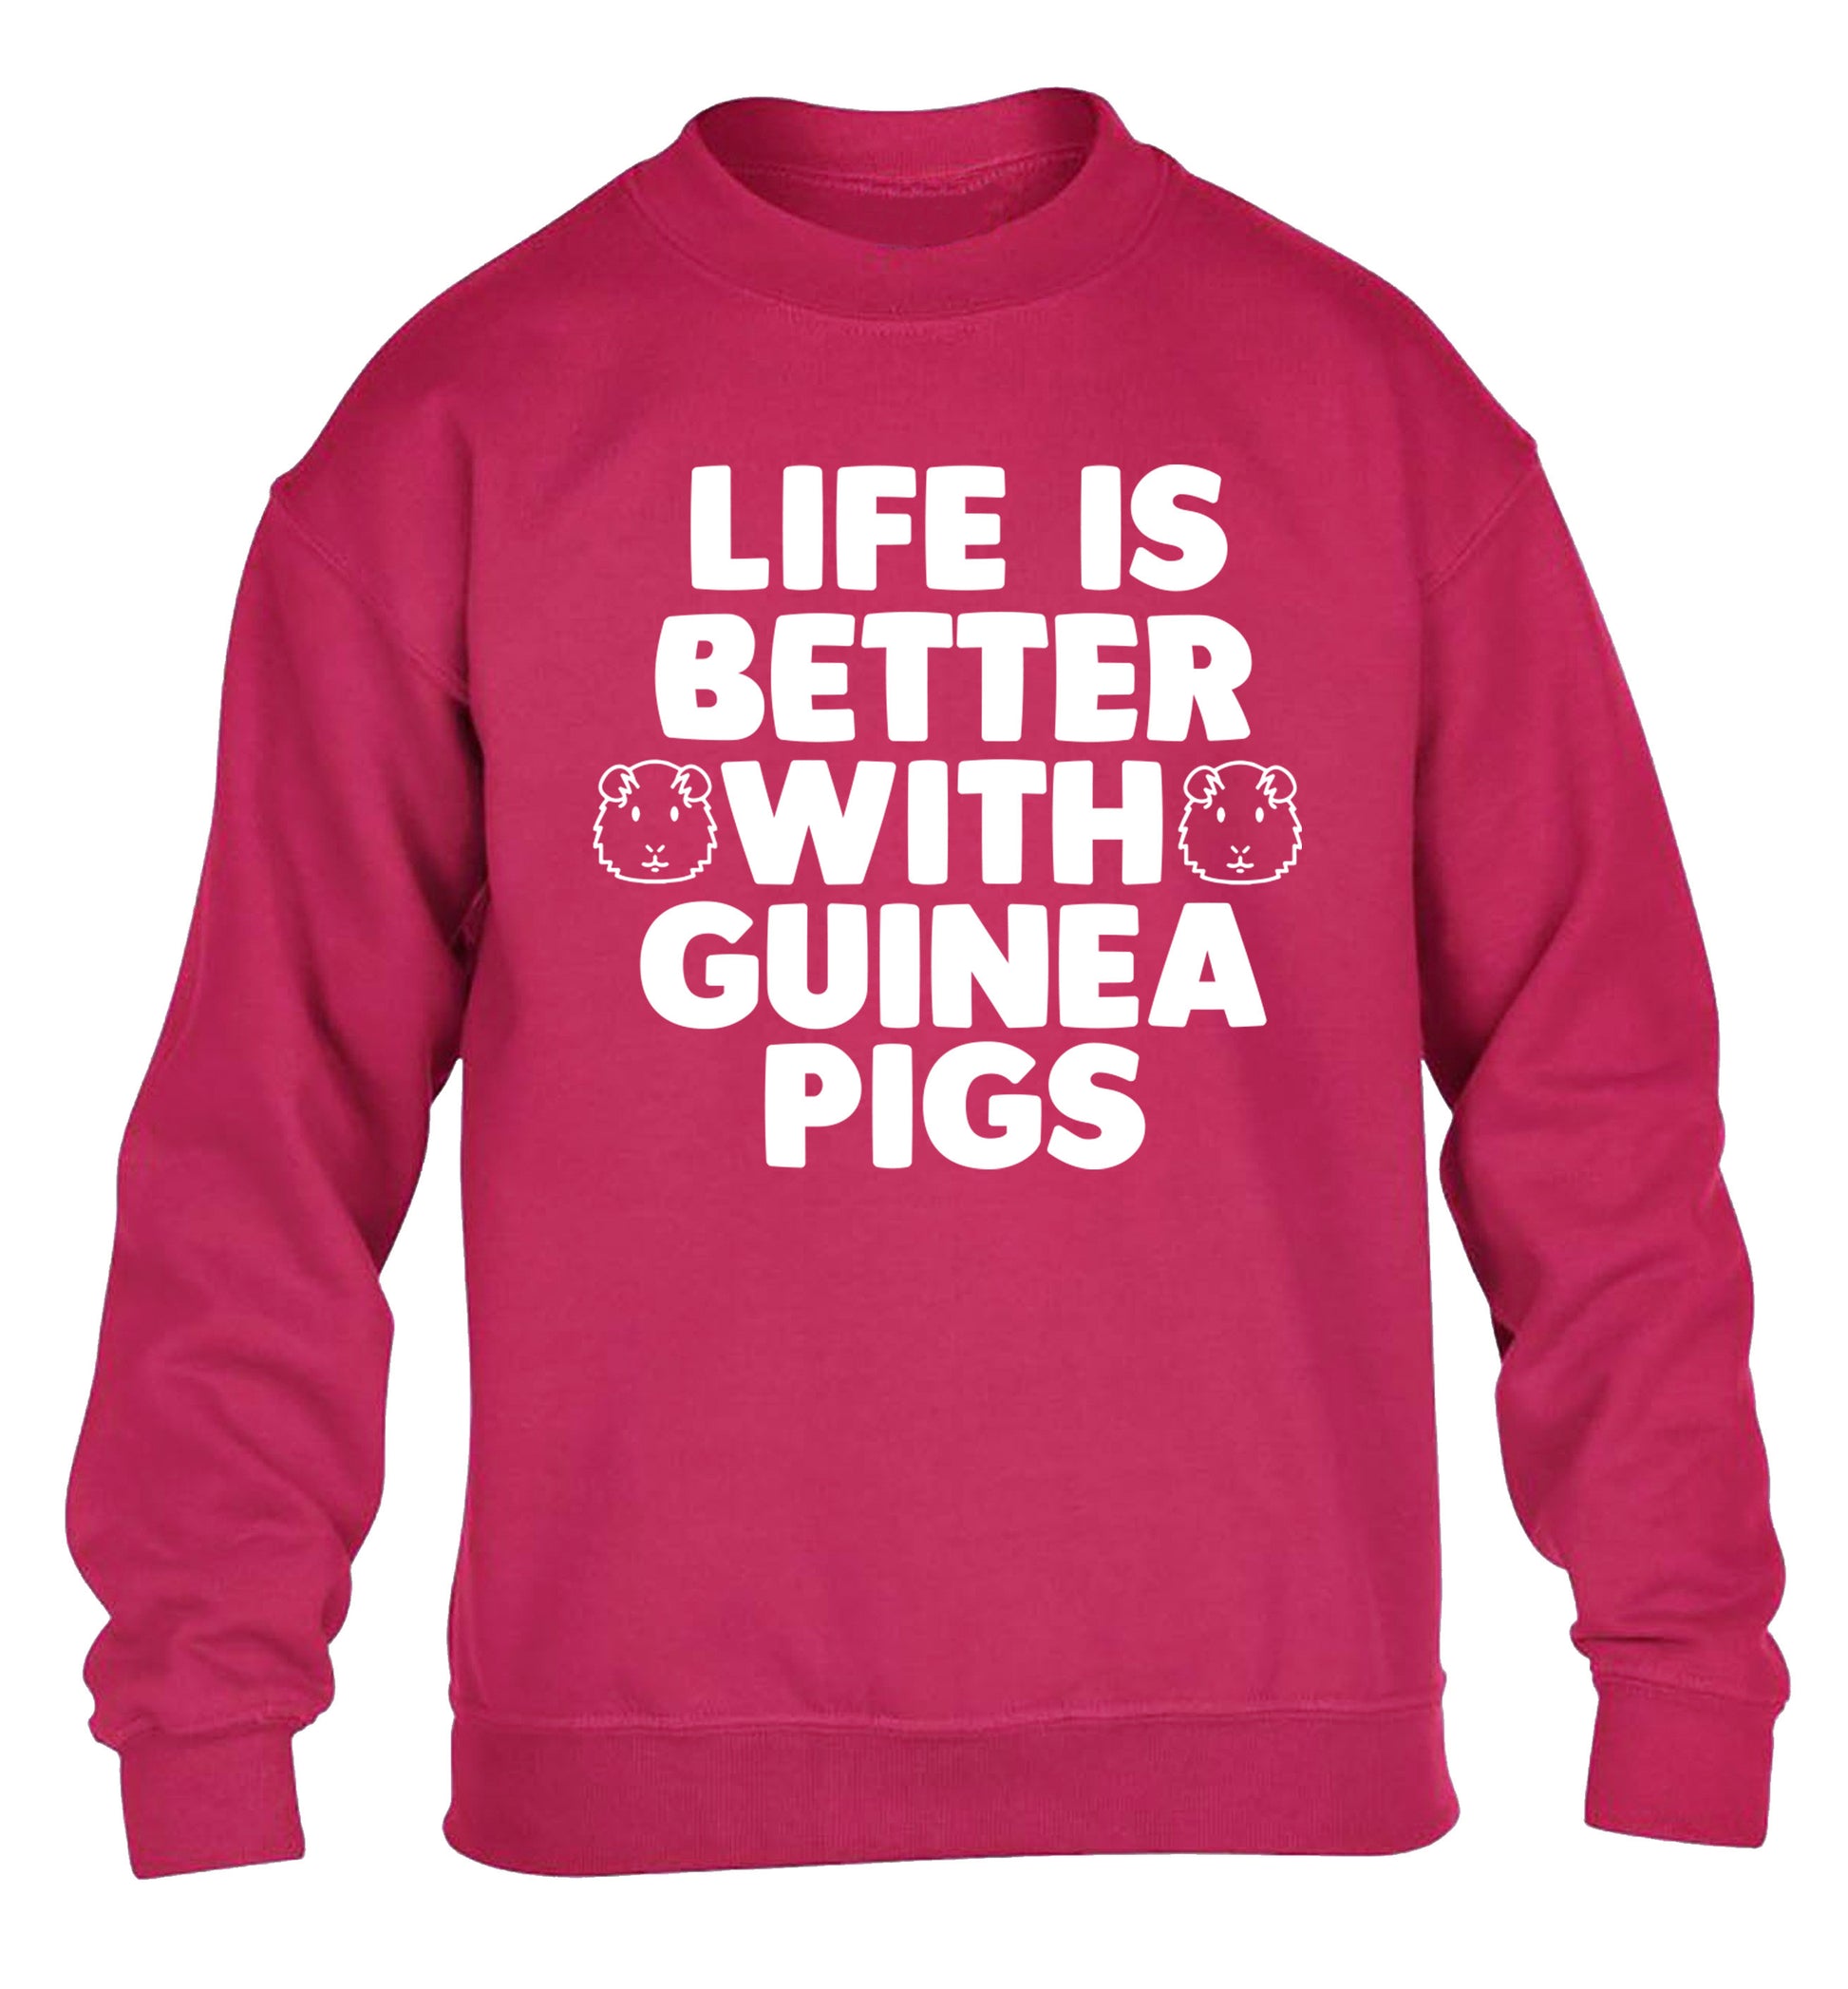 Life is better with guinea pigs children's pink  sweater 12-14 Years